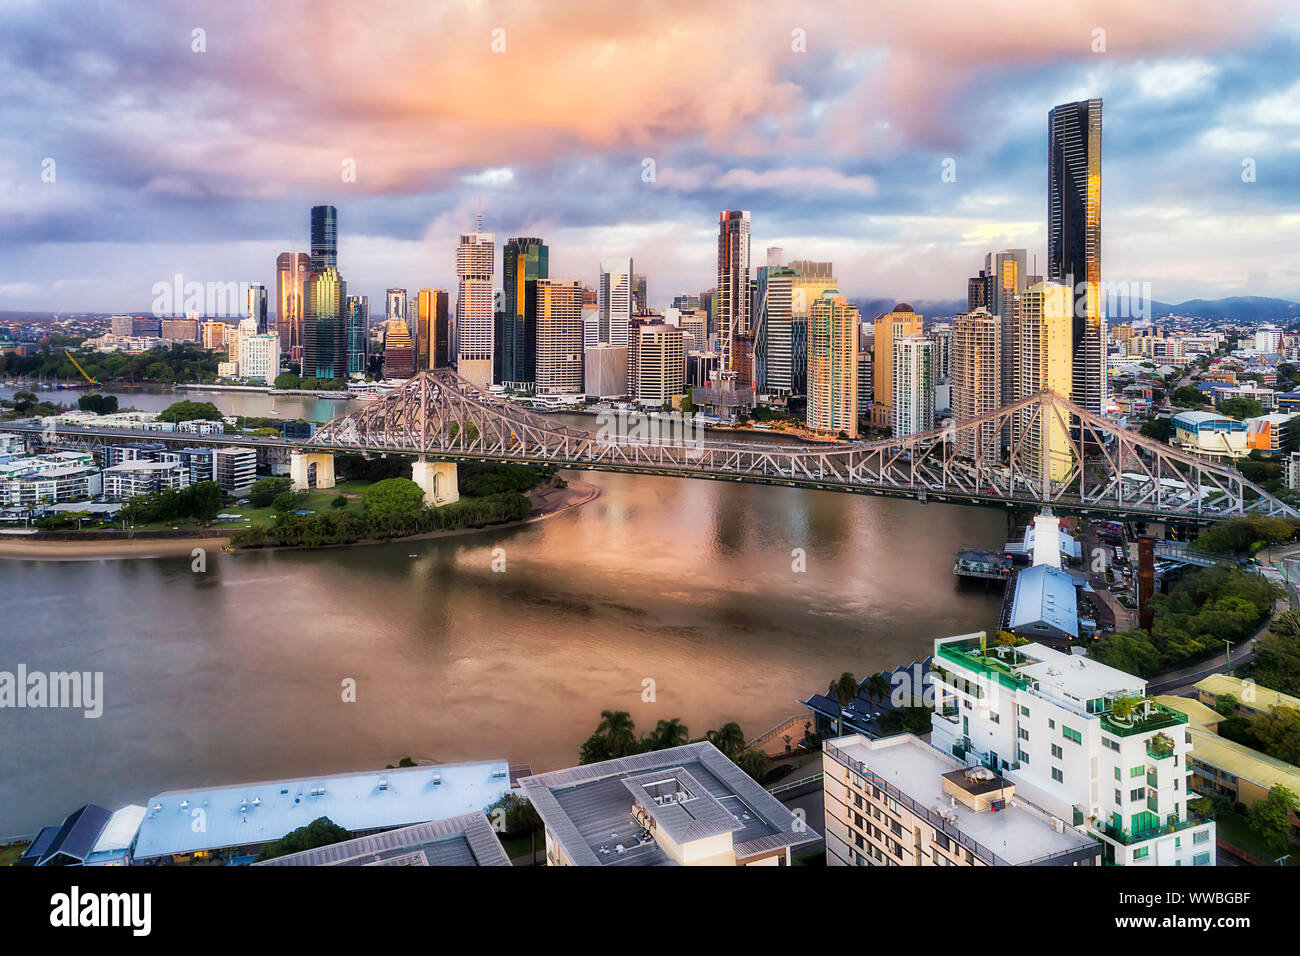 Story bridge in Brisbane city over Brisbane river in front of high-rise business towers and apartment buildings at sunrise in elevated aerial view. Stock Photo